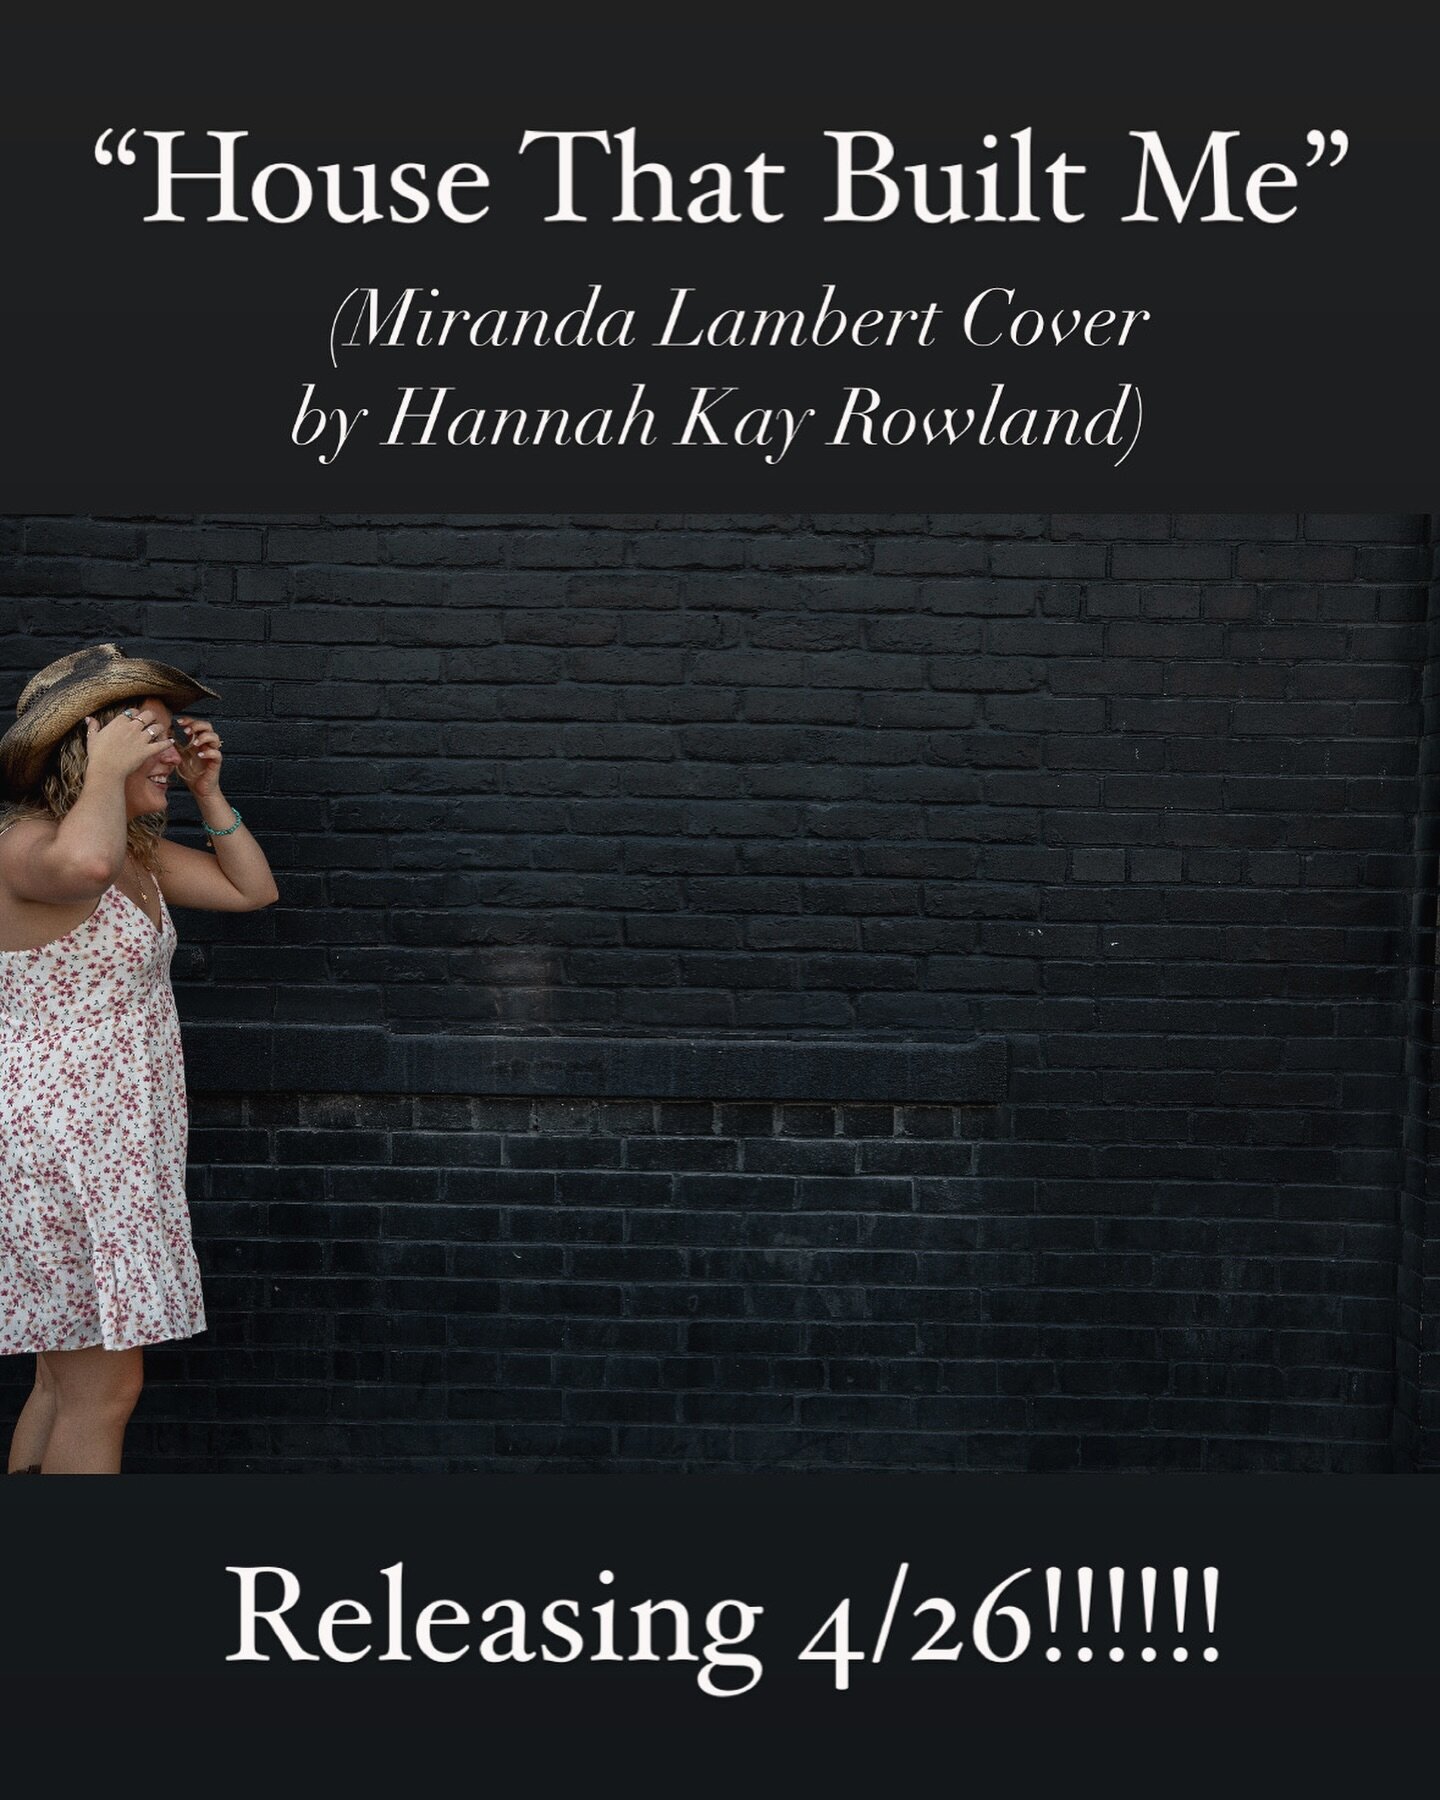 Hi everyone! I&rsquo;m super excited to announce that &ldquo;House that Built Me&rdquo; will be released on 4/26!!! I love this song and I hope that y&rsquo;all will as well! Stay tuned for more updates🤗🤍 #HKR #housethatbuiltme #recordingartist